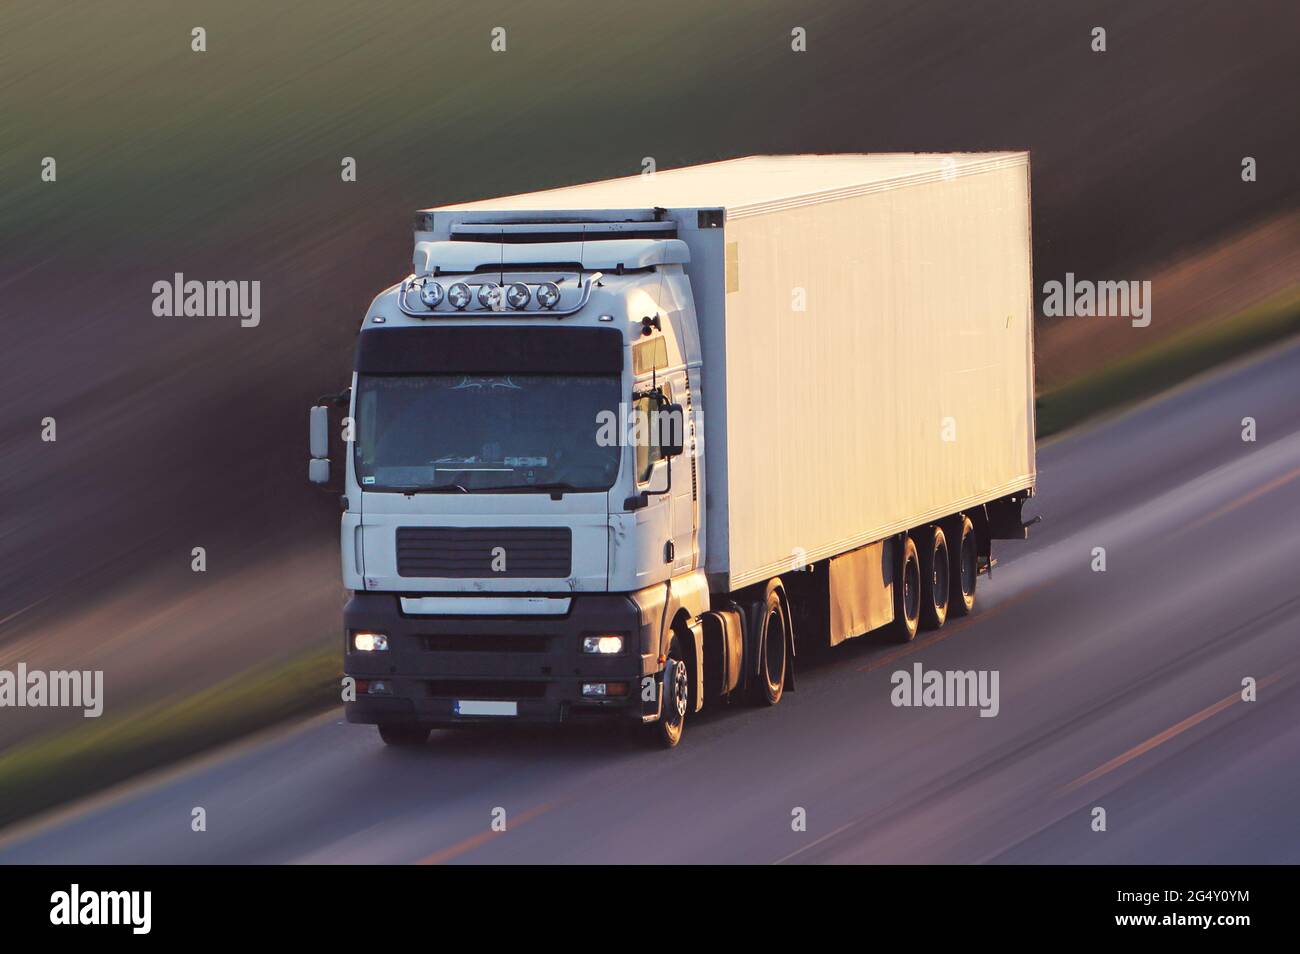 Truck cargo with lift parking at warehouse, road freight delivery logistics and transport. Stock Photo